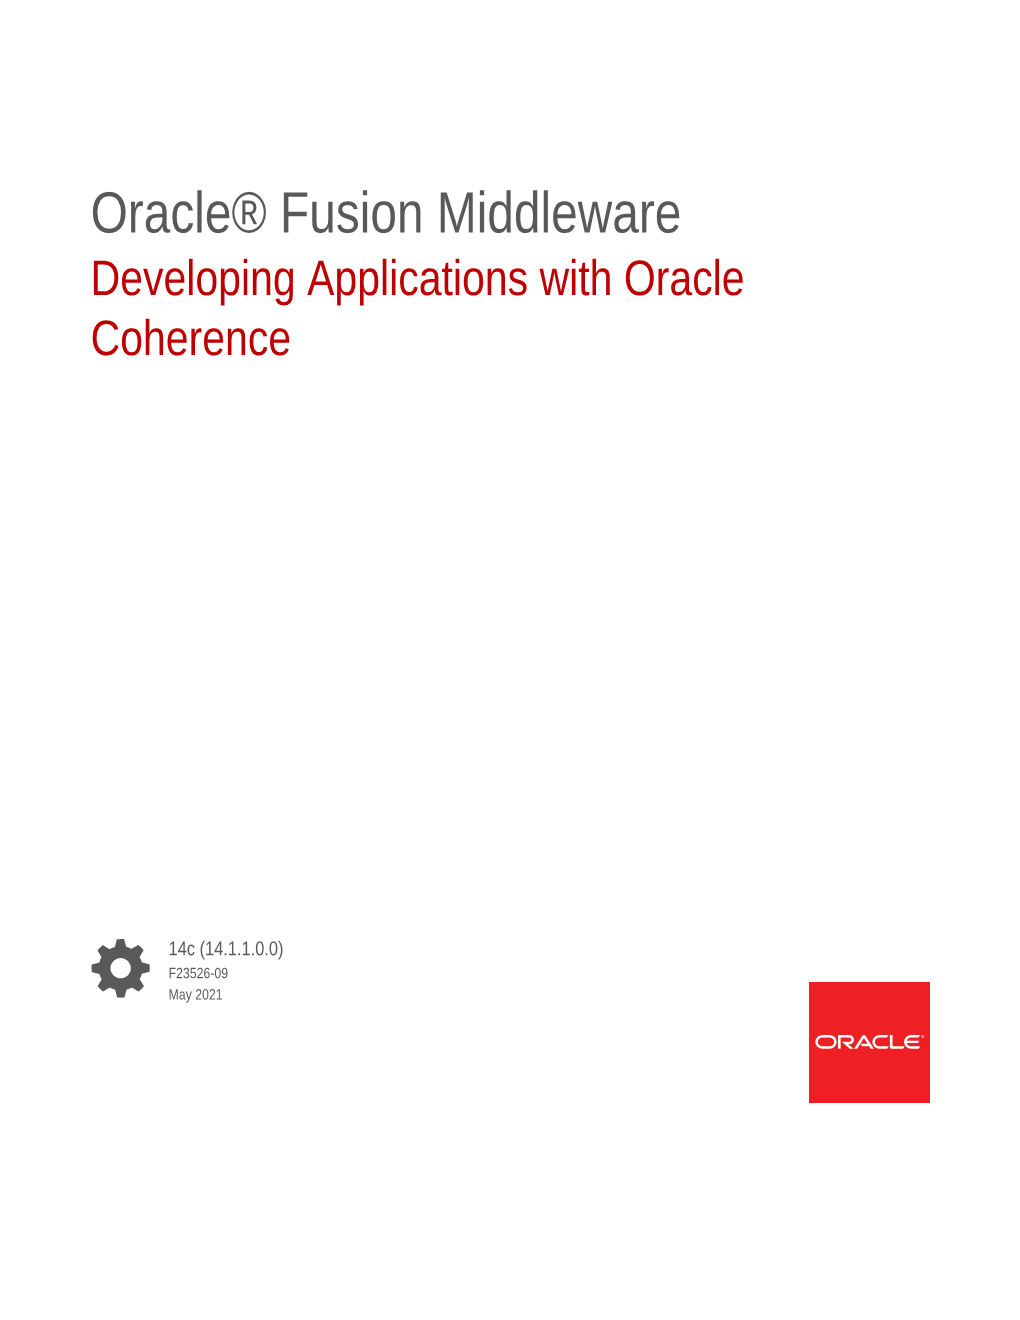 Developing Applications with Oracle Coherence